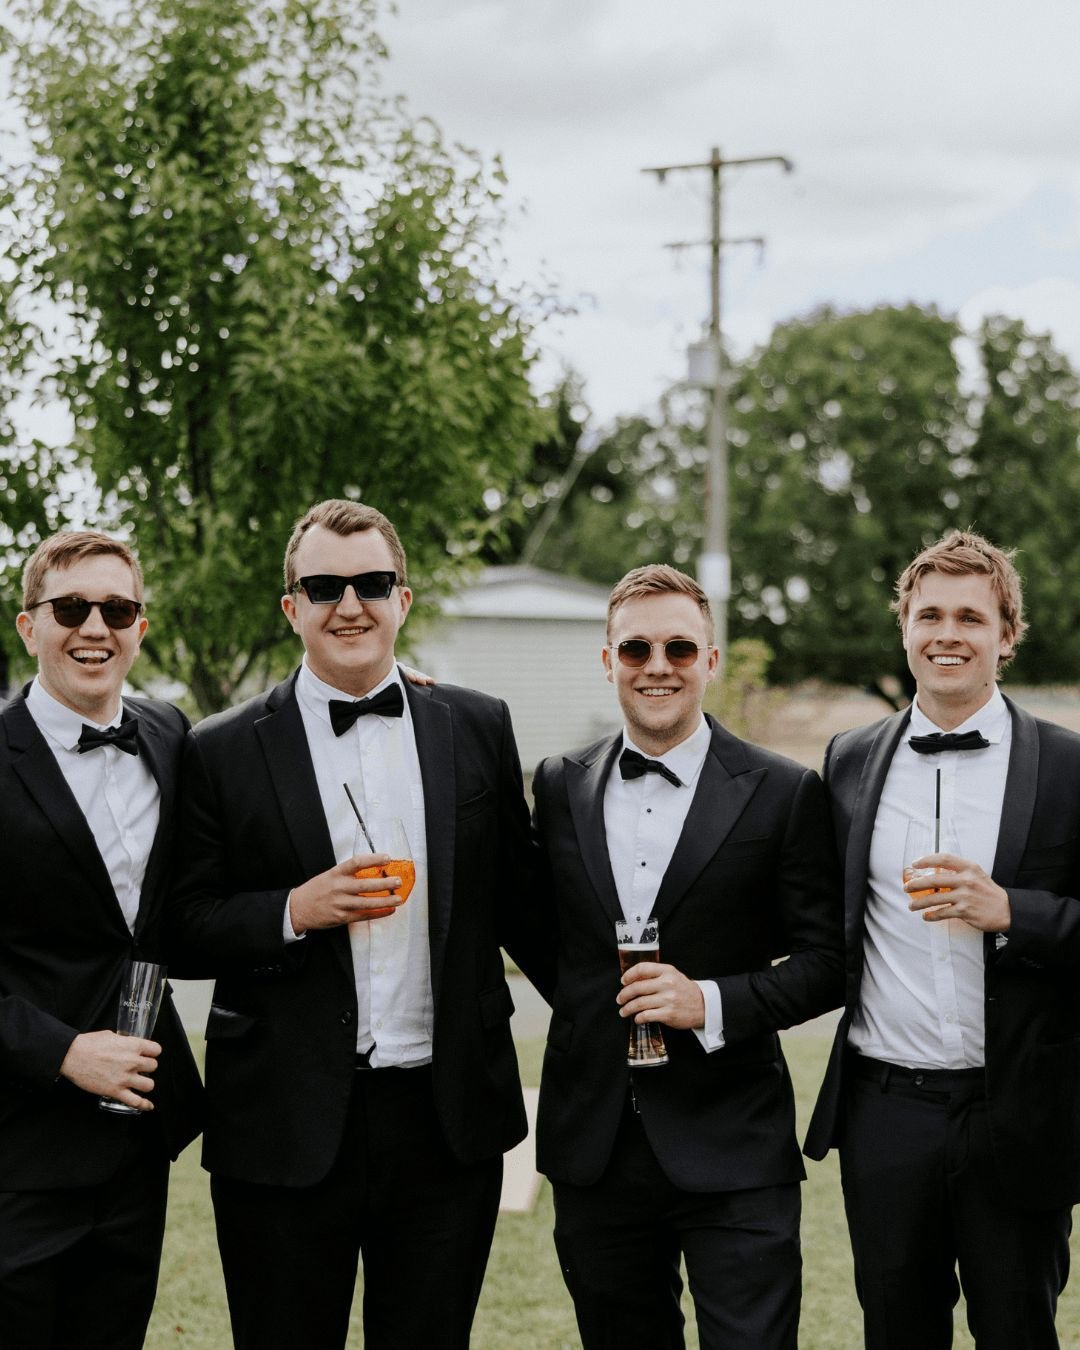 Who says elegance can't meet rustic charm? 🌾✨ At Petrichor Farm, we blend the sophisticated allure of black tie events with the natural beauty of the countryside. Witness men in sleek tuxedos against a backdrop of rolling fields and sunset hues&mdas